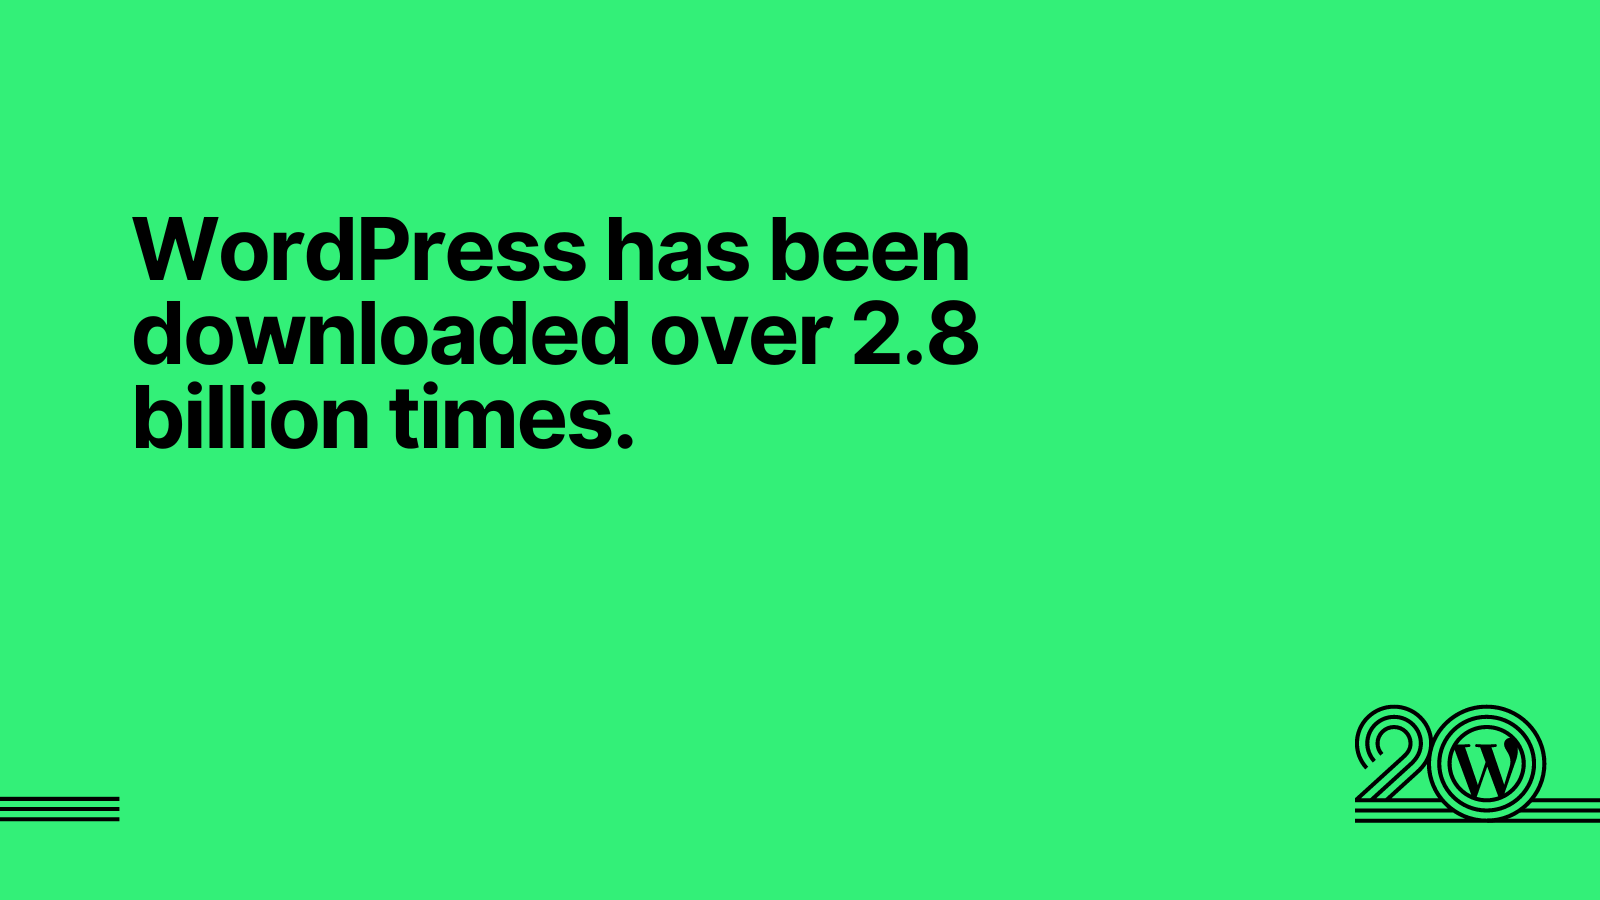 Green background with black lettering that reads: WordPress has been downloaded over 2.8 billion times.